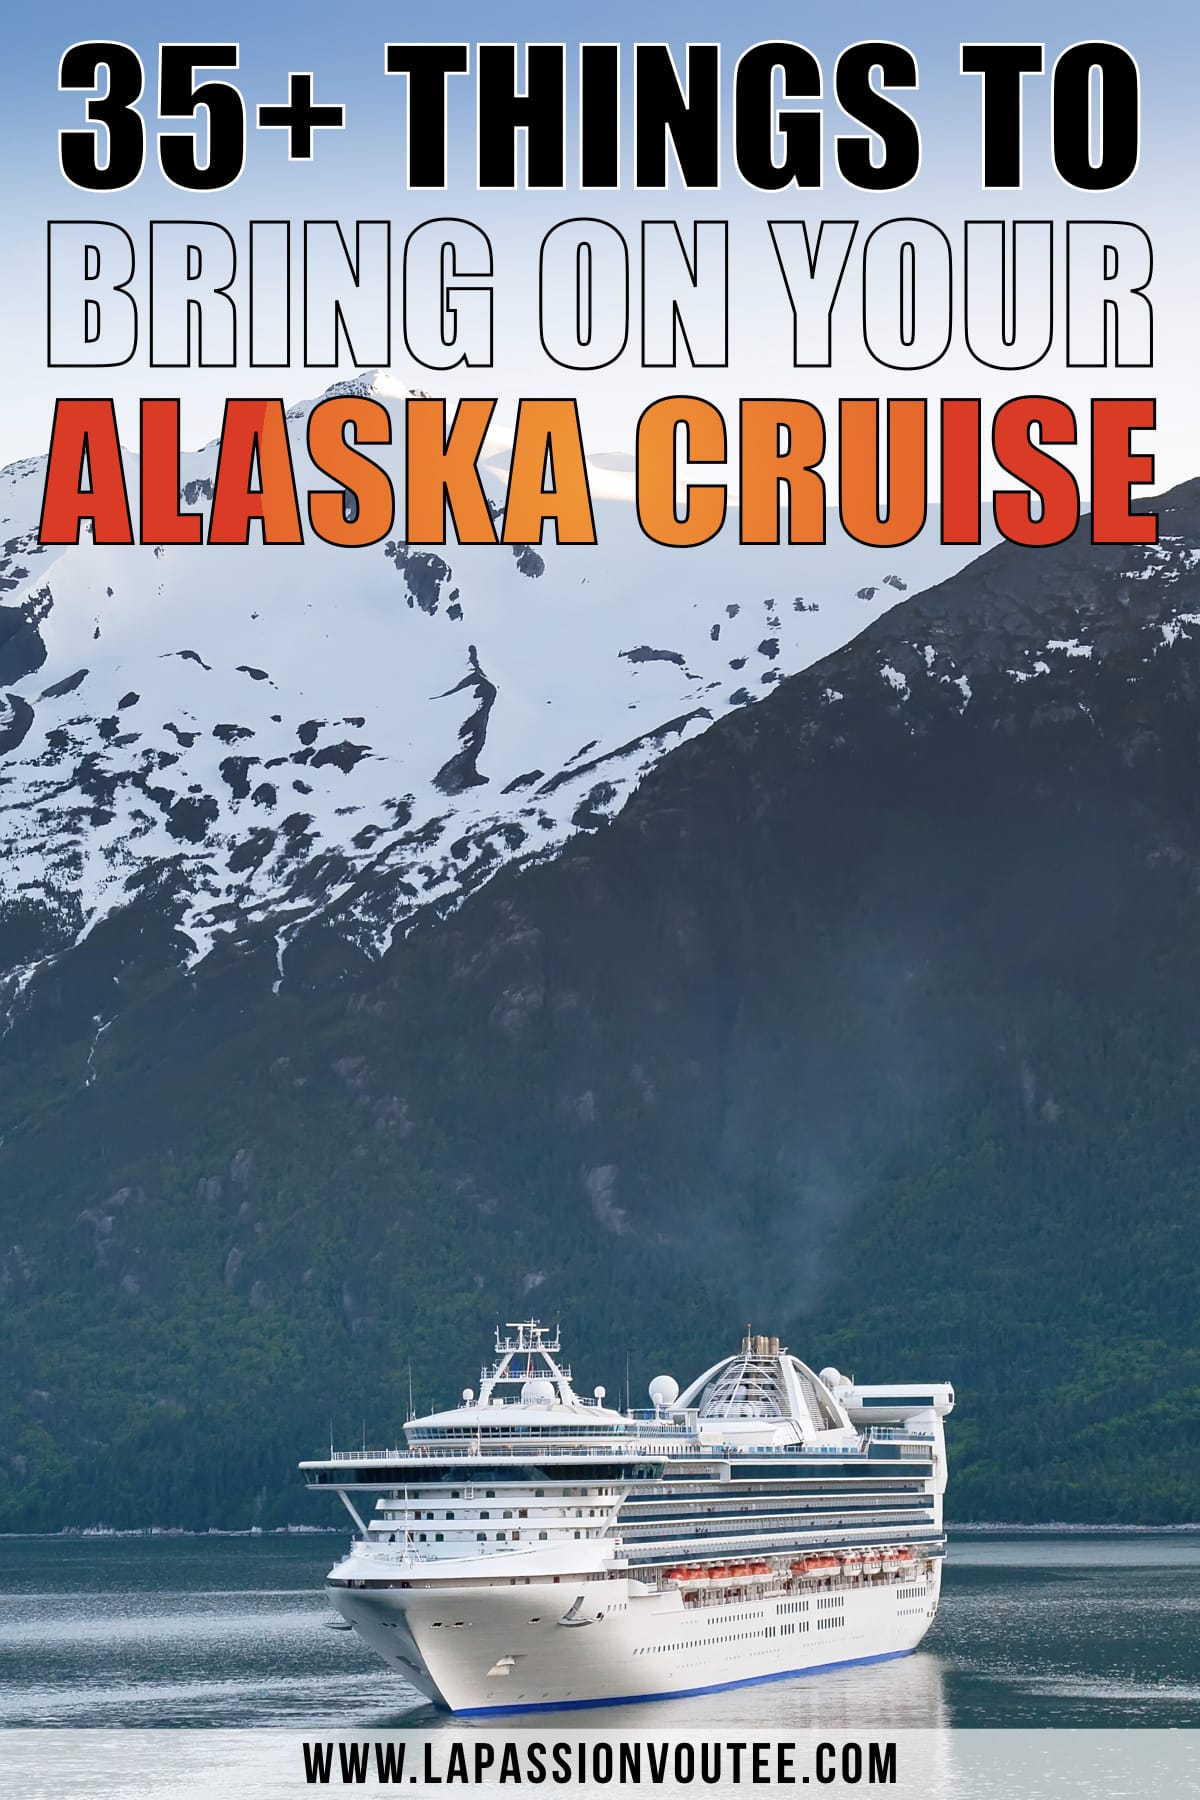 Wondering about what to pack for your Alaska cruise? I live in Alaska and I've covered everything you need for your vacation and things to take on a cruise to Alaska.